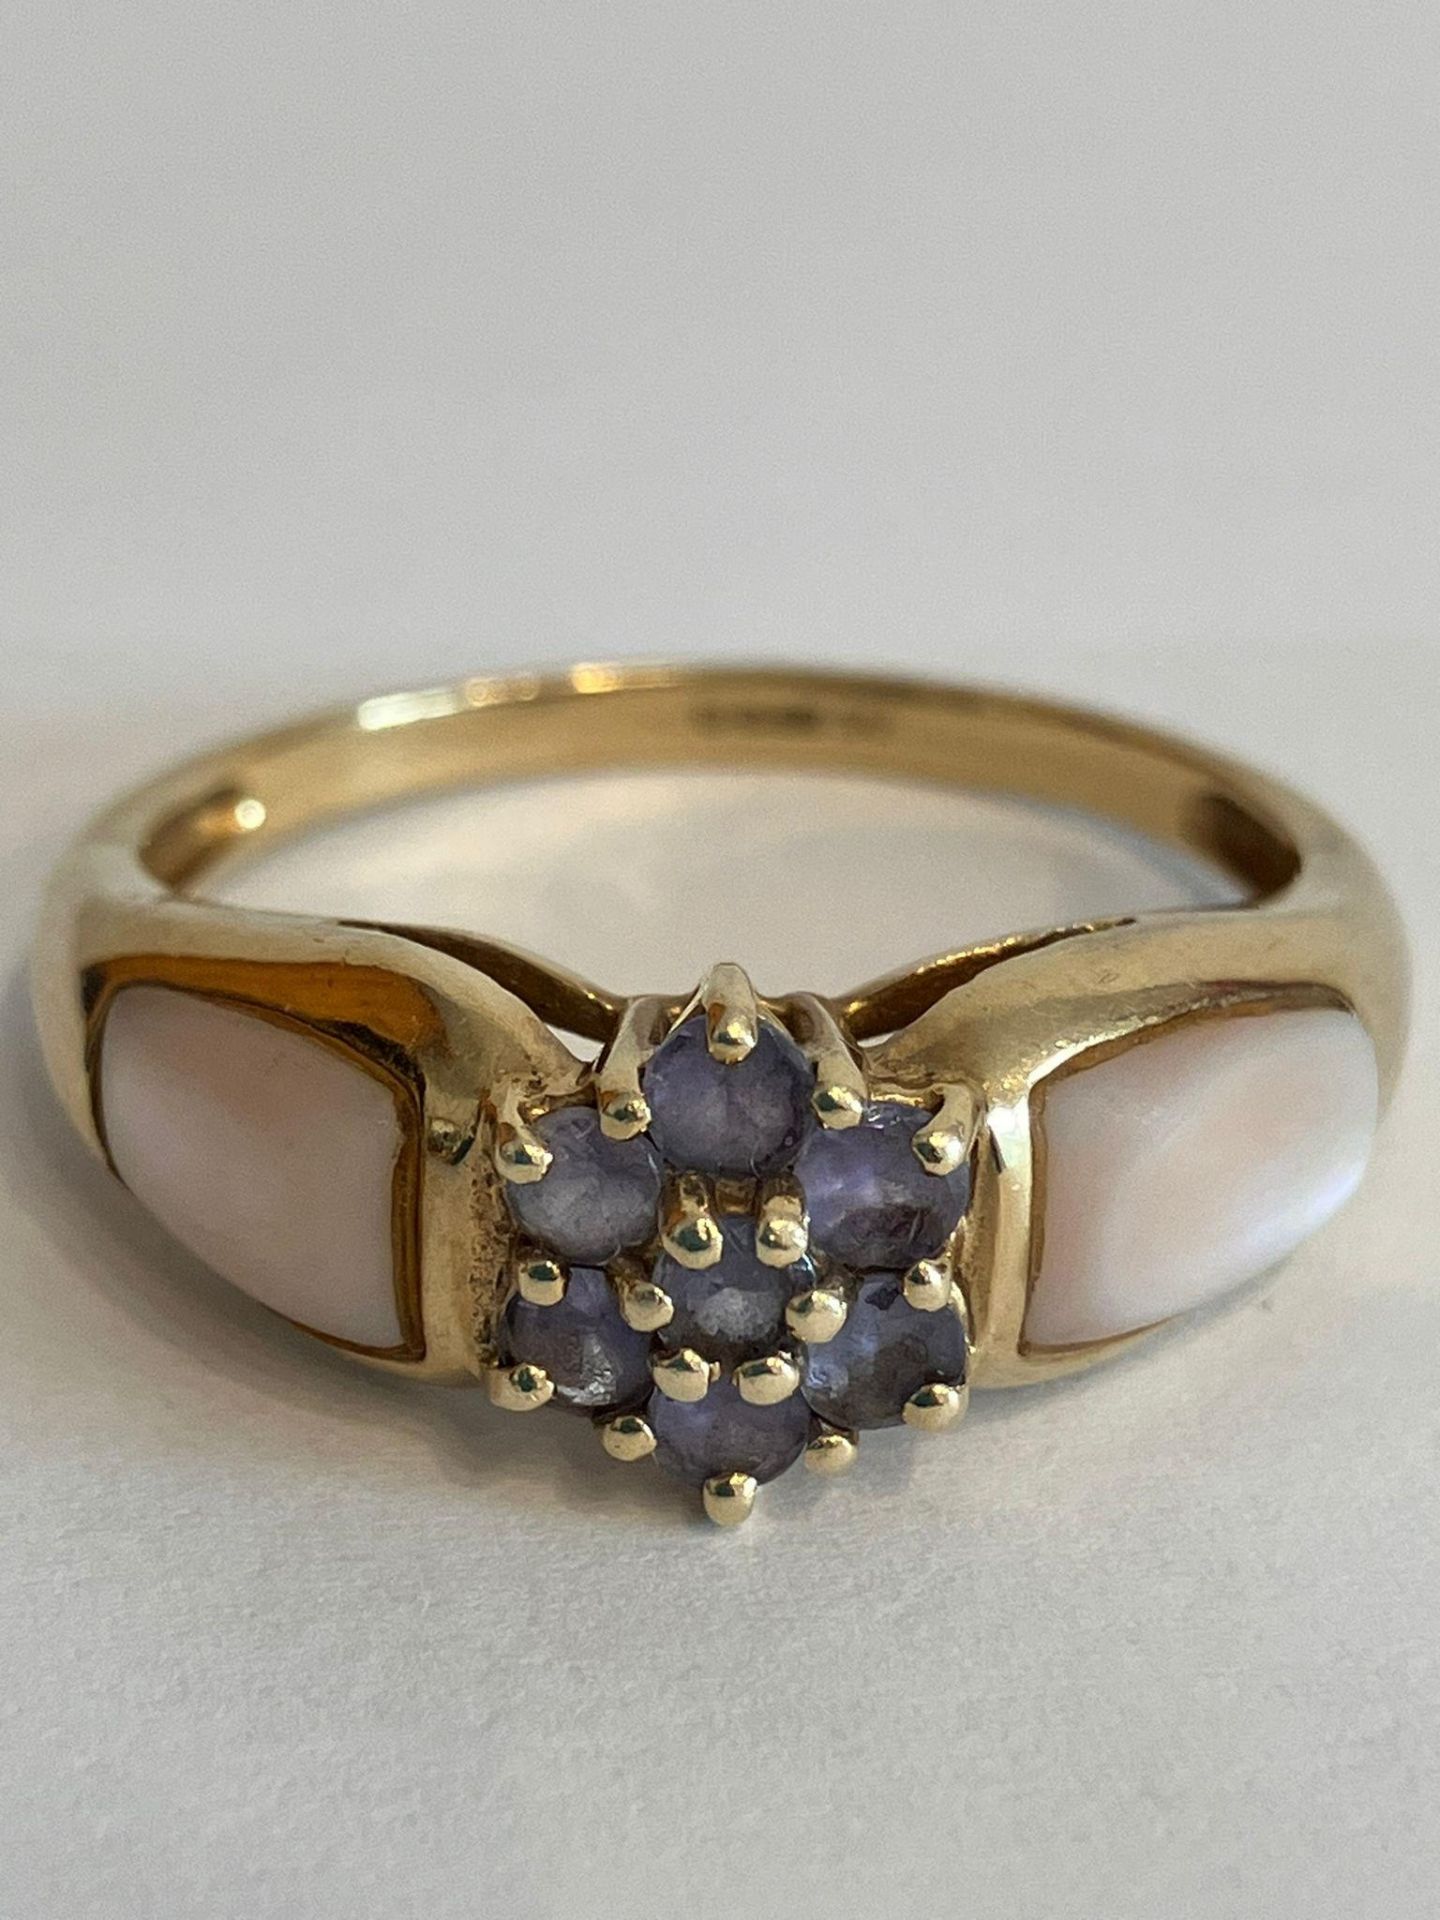 Magnificent 9 carat GOLD and TANZANITE RING with Mother of pearl detail shoulders. Full UK hallmark.